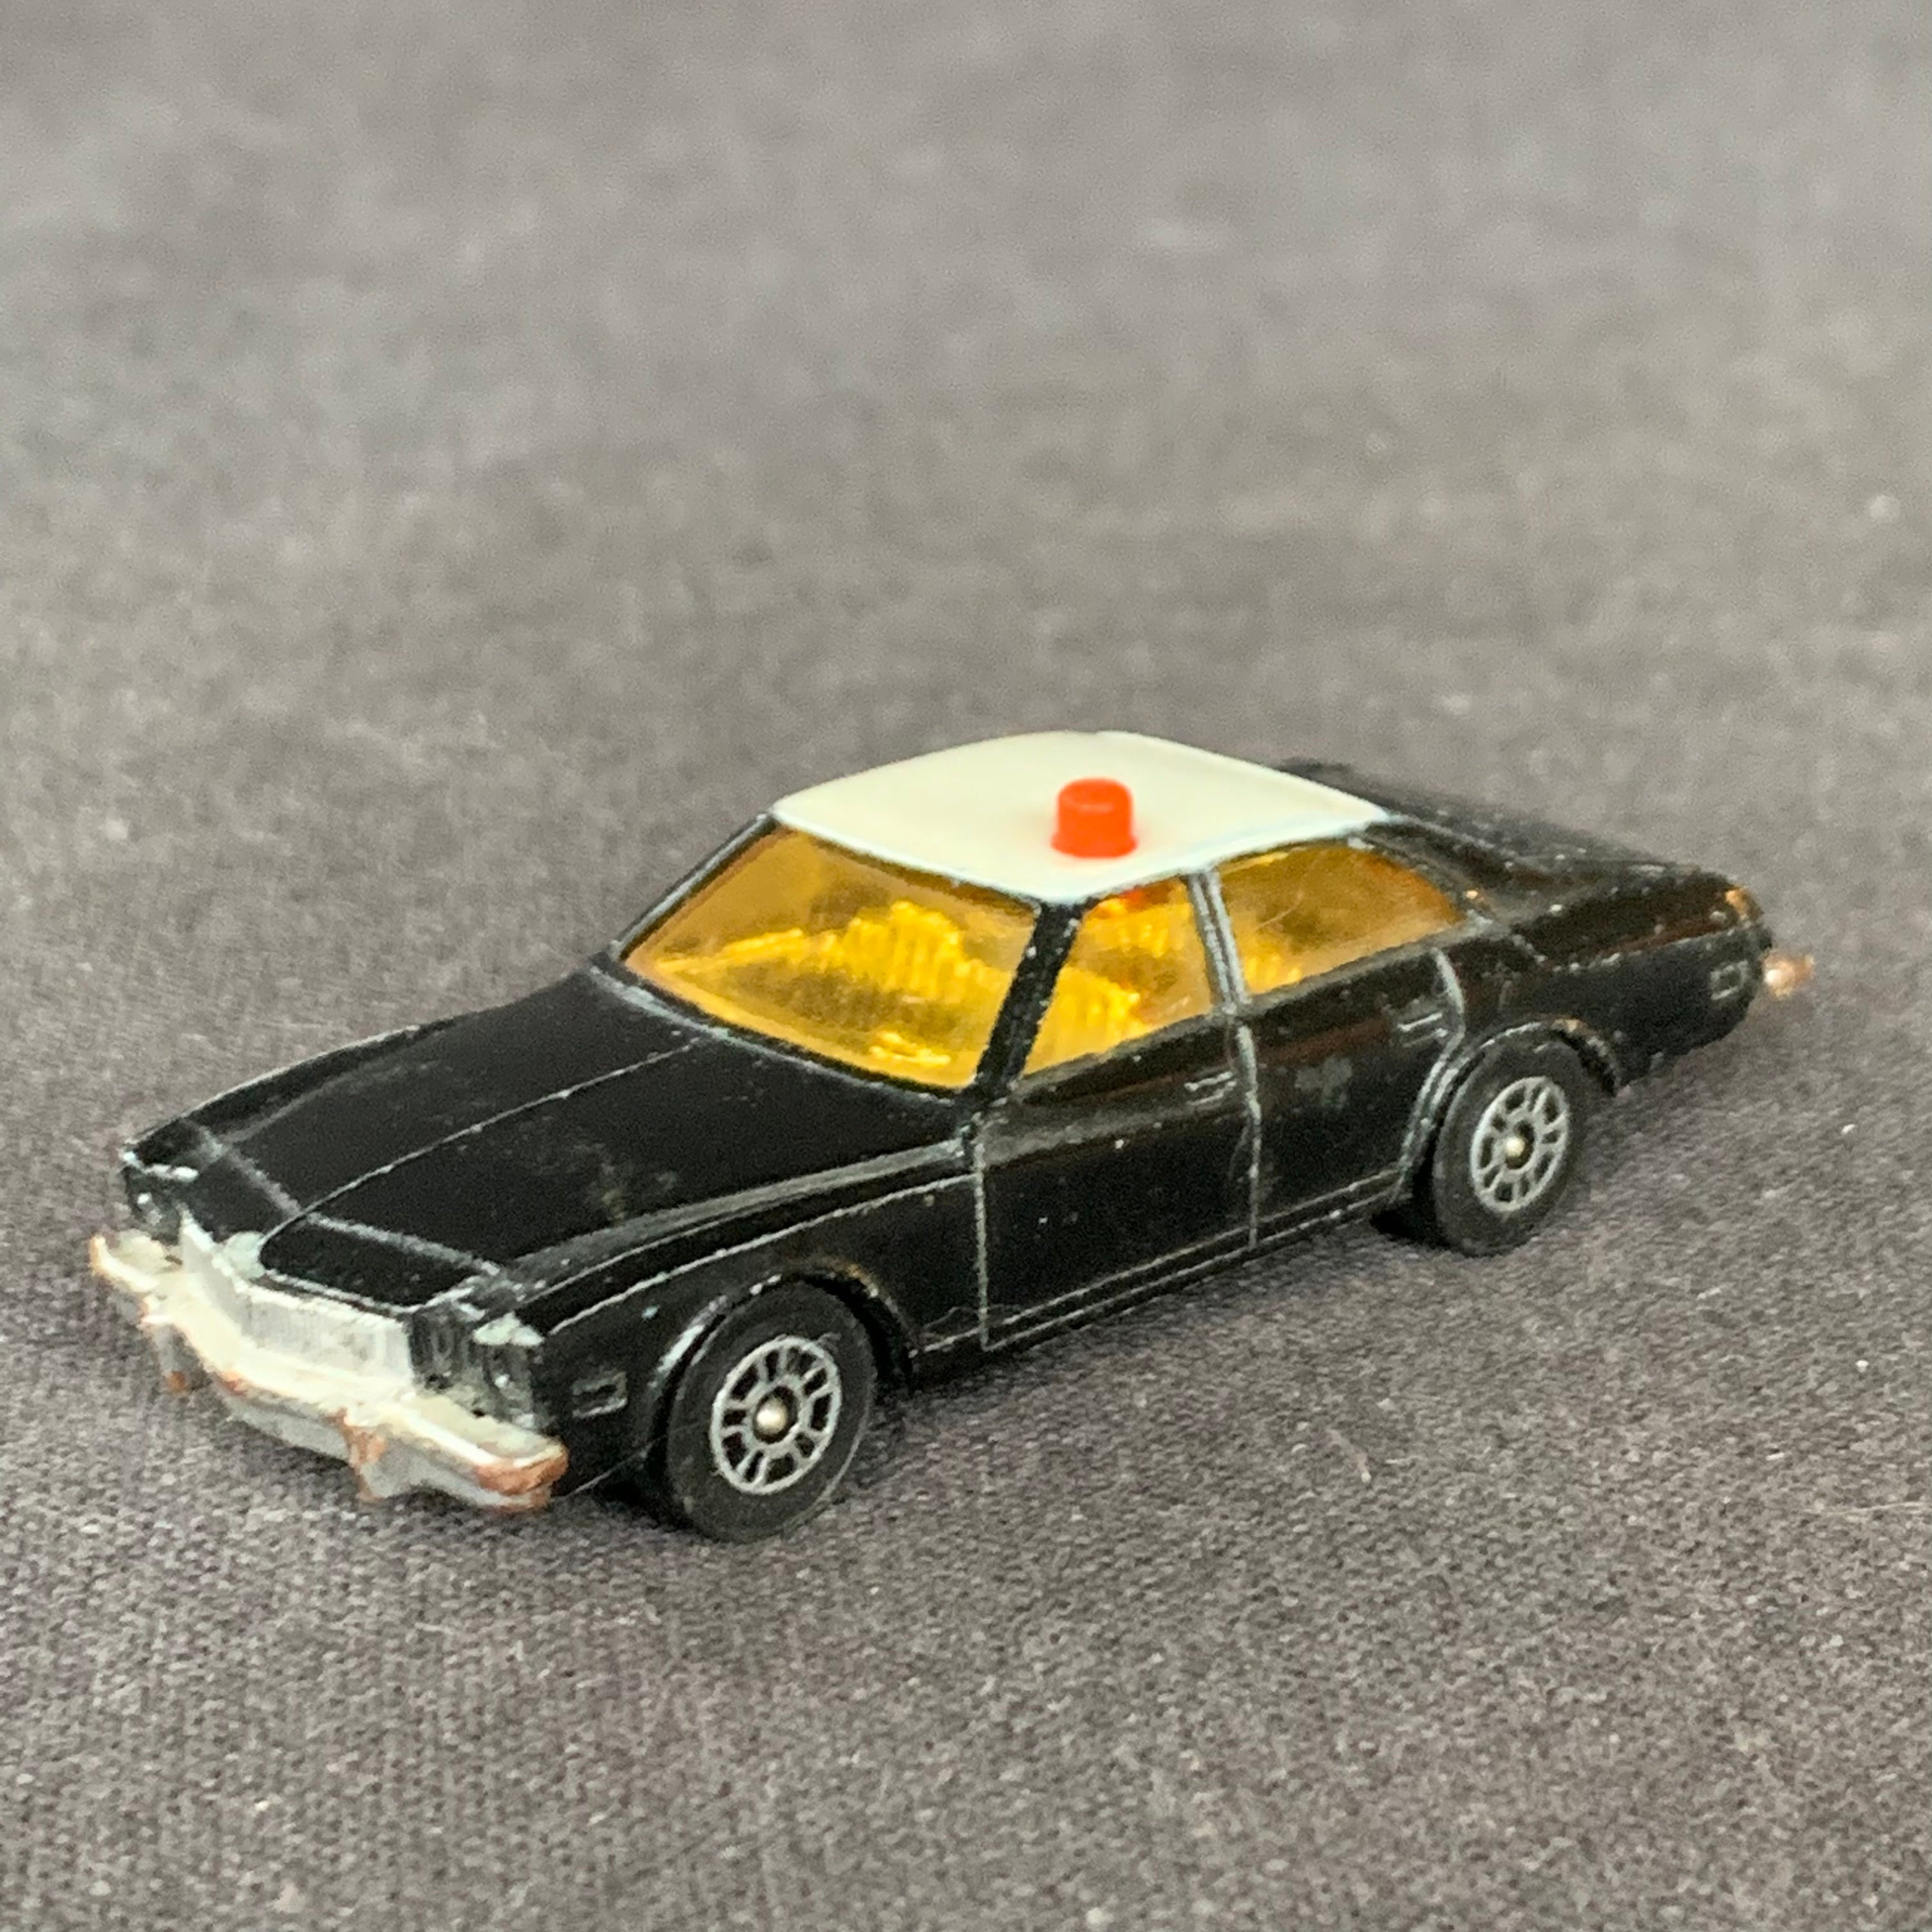 Buick Toy Car 